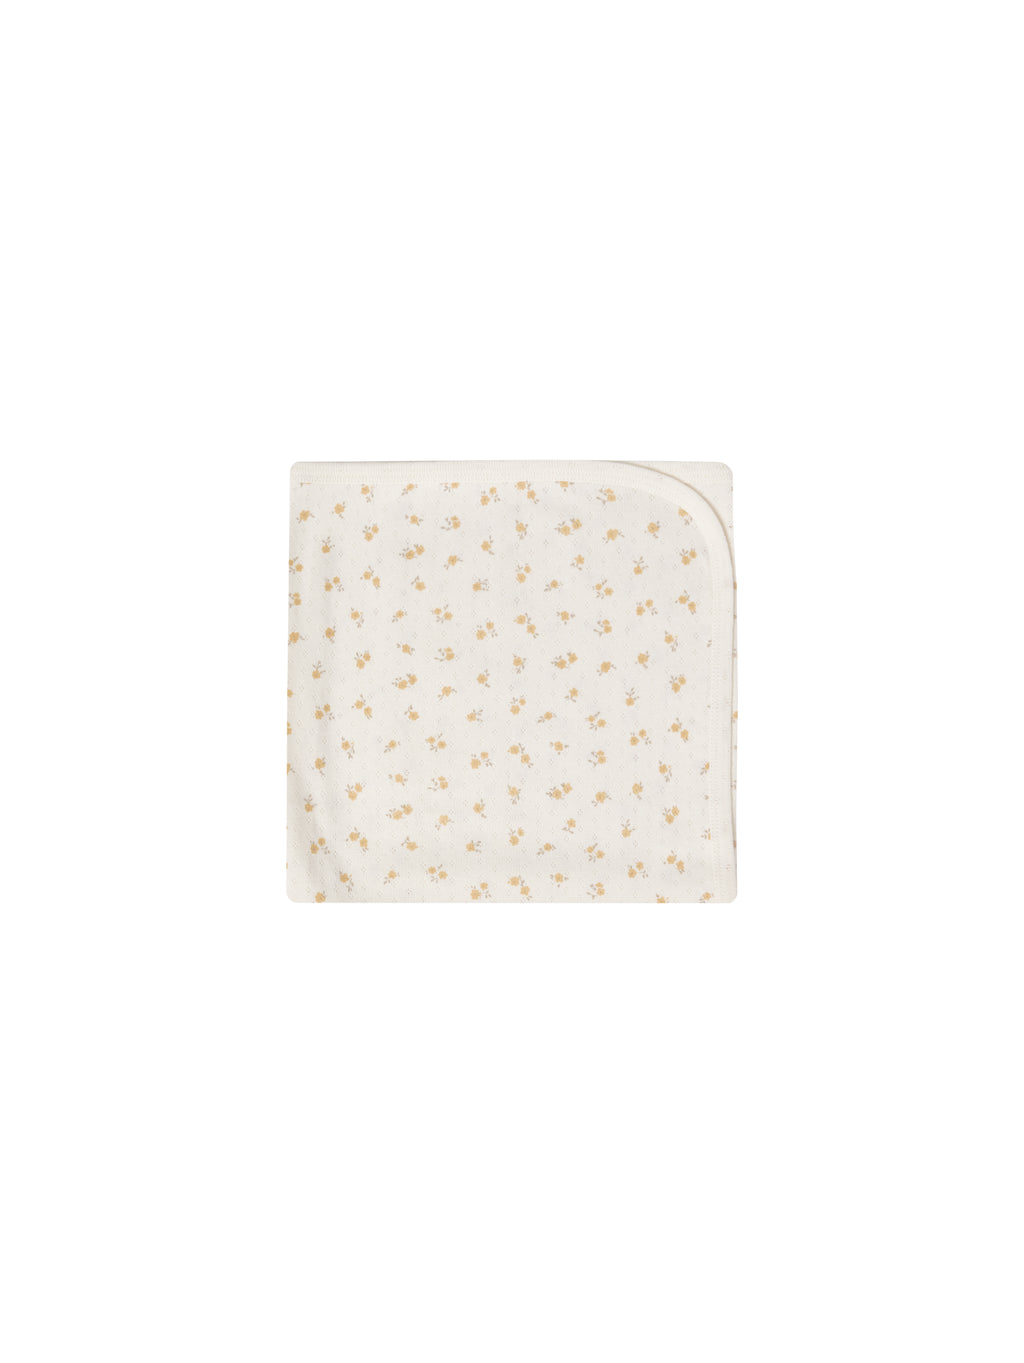 Quincy Mae Pointelle Baby Blanket - Ditsy Melon